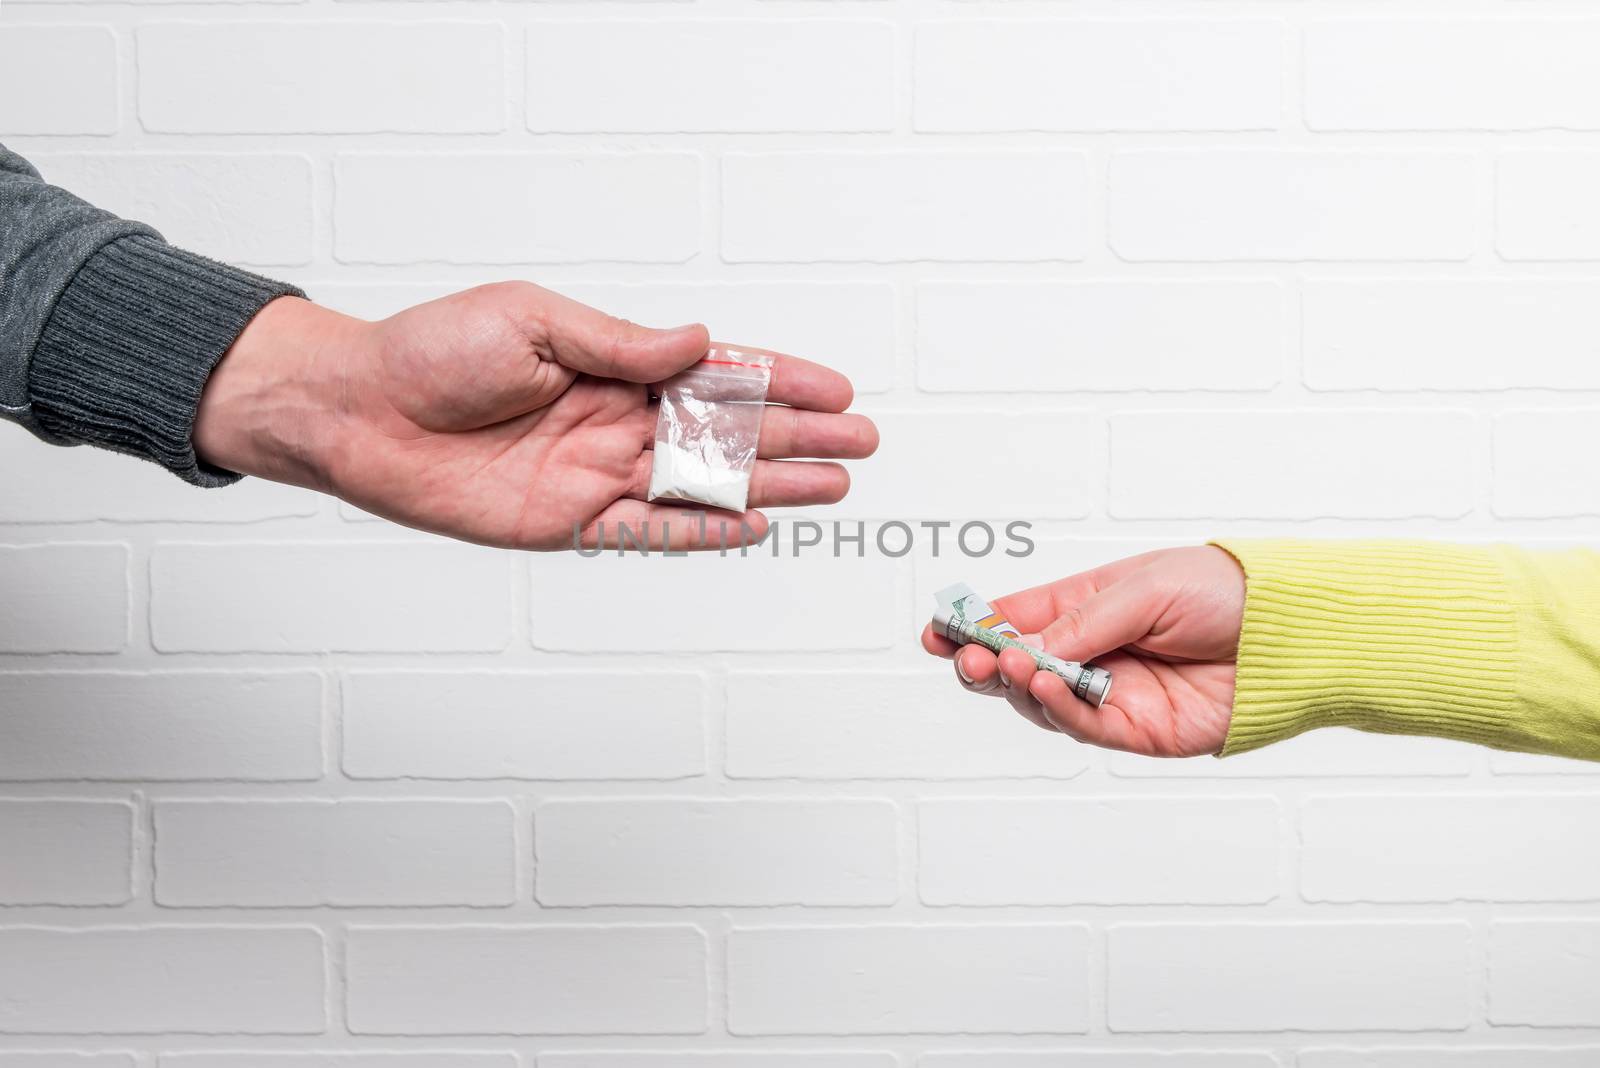 Transfer of money and drugs close-up against a white brick wall by kosmsos111